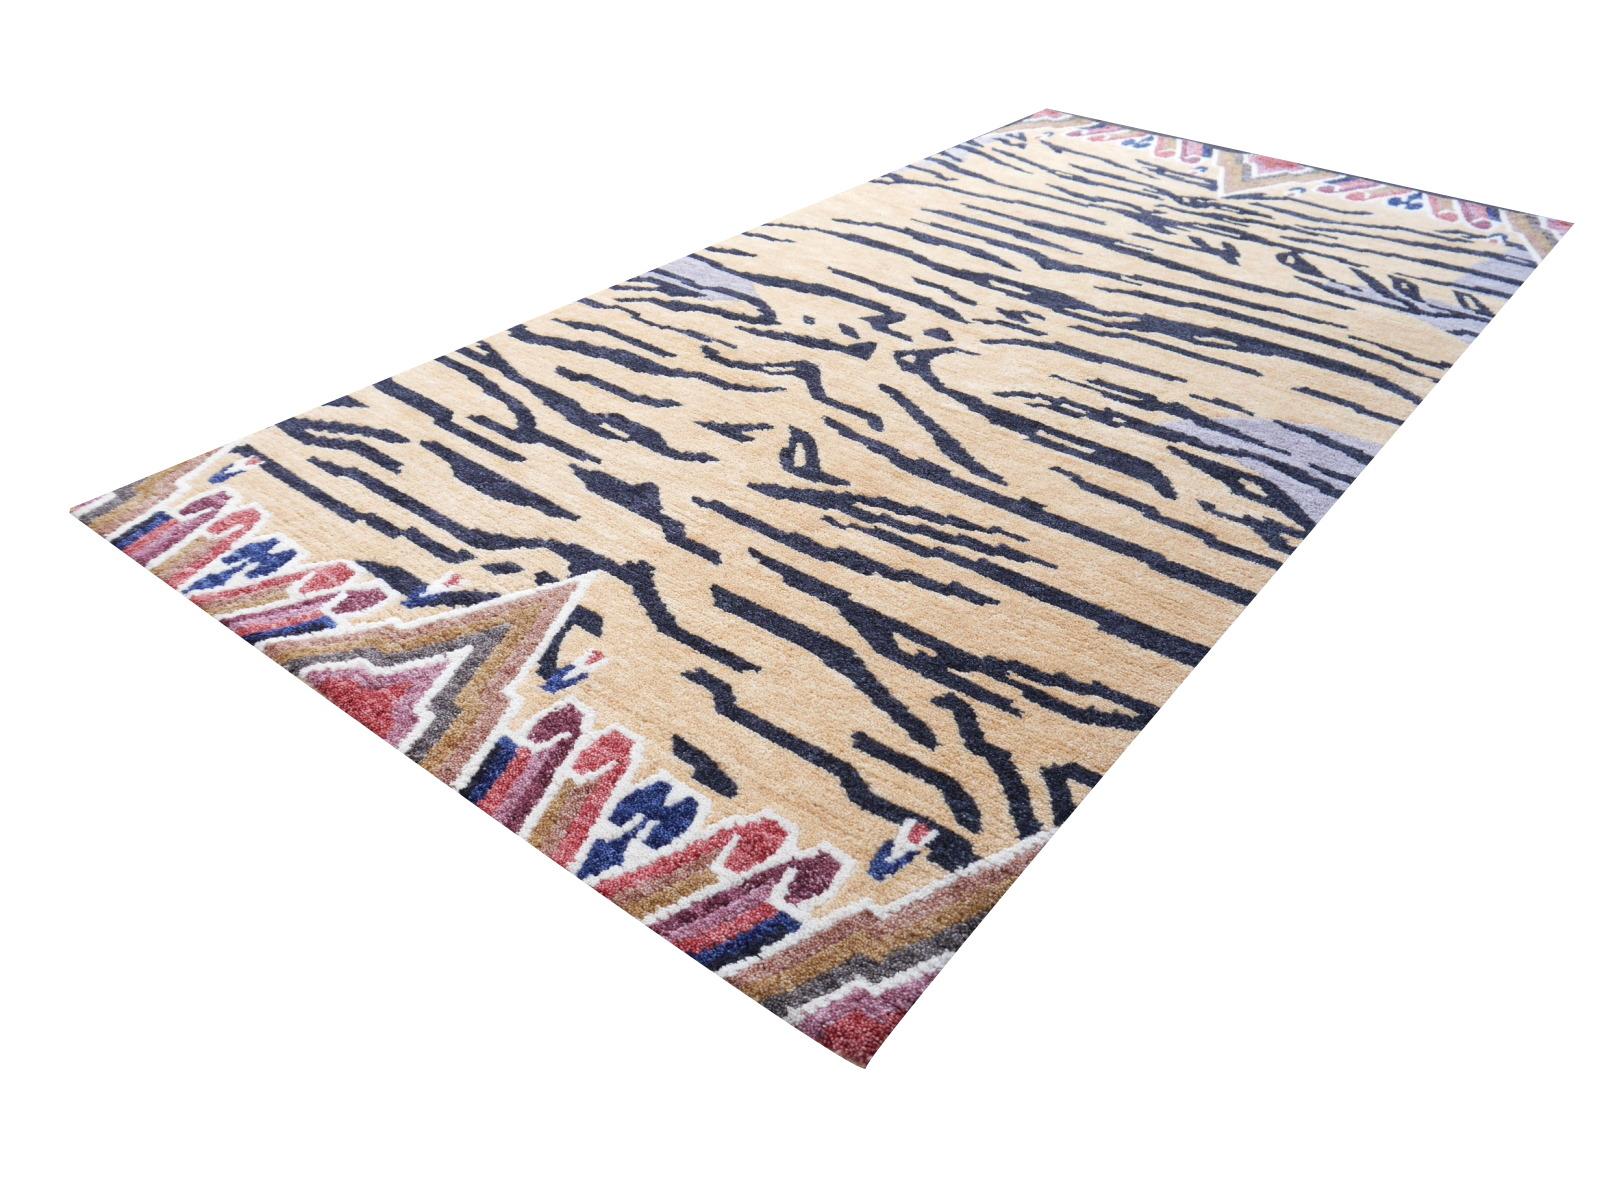 Tibetan Tiger Rug Pure Wool Hand Knotted by Djoharian Collection Antique Design 12